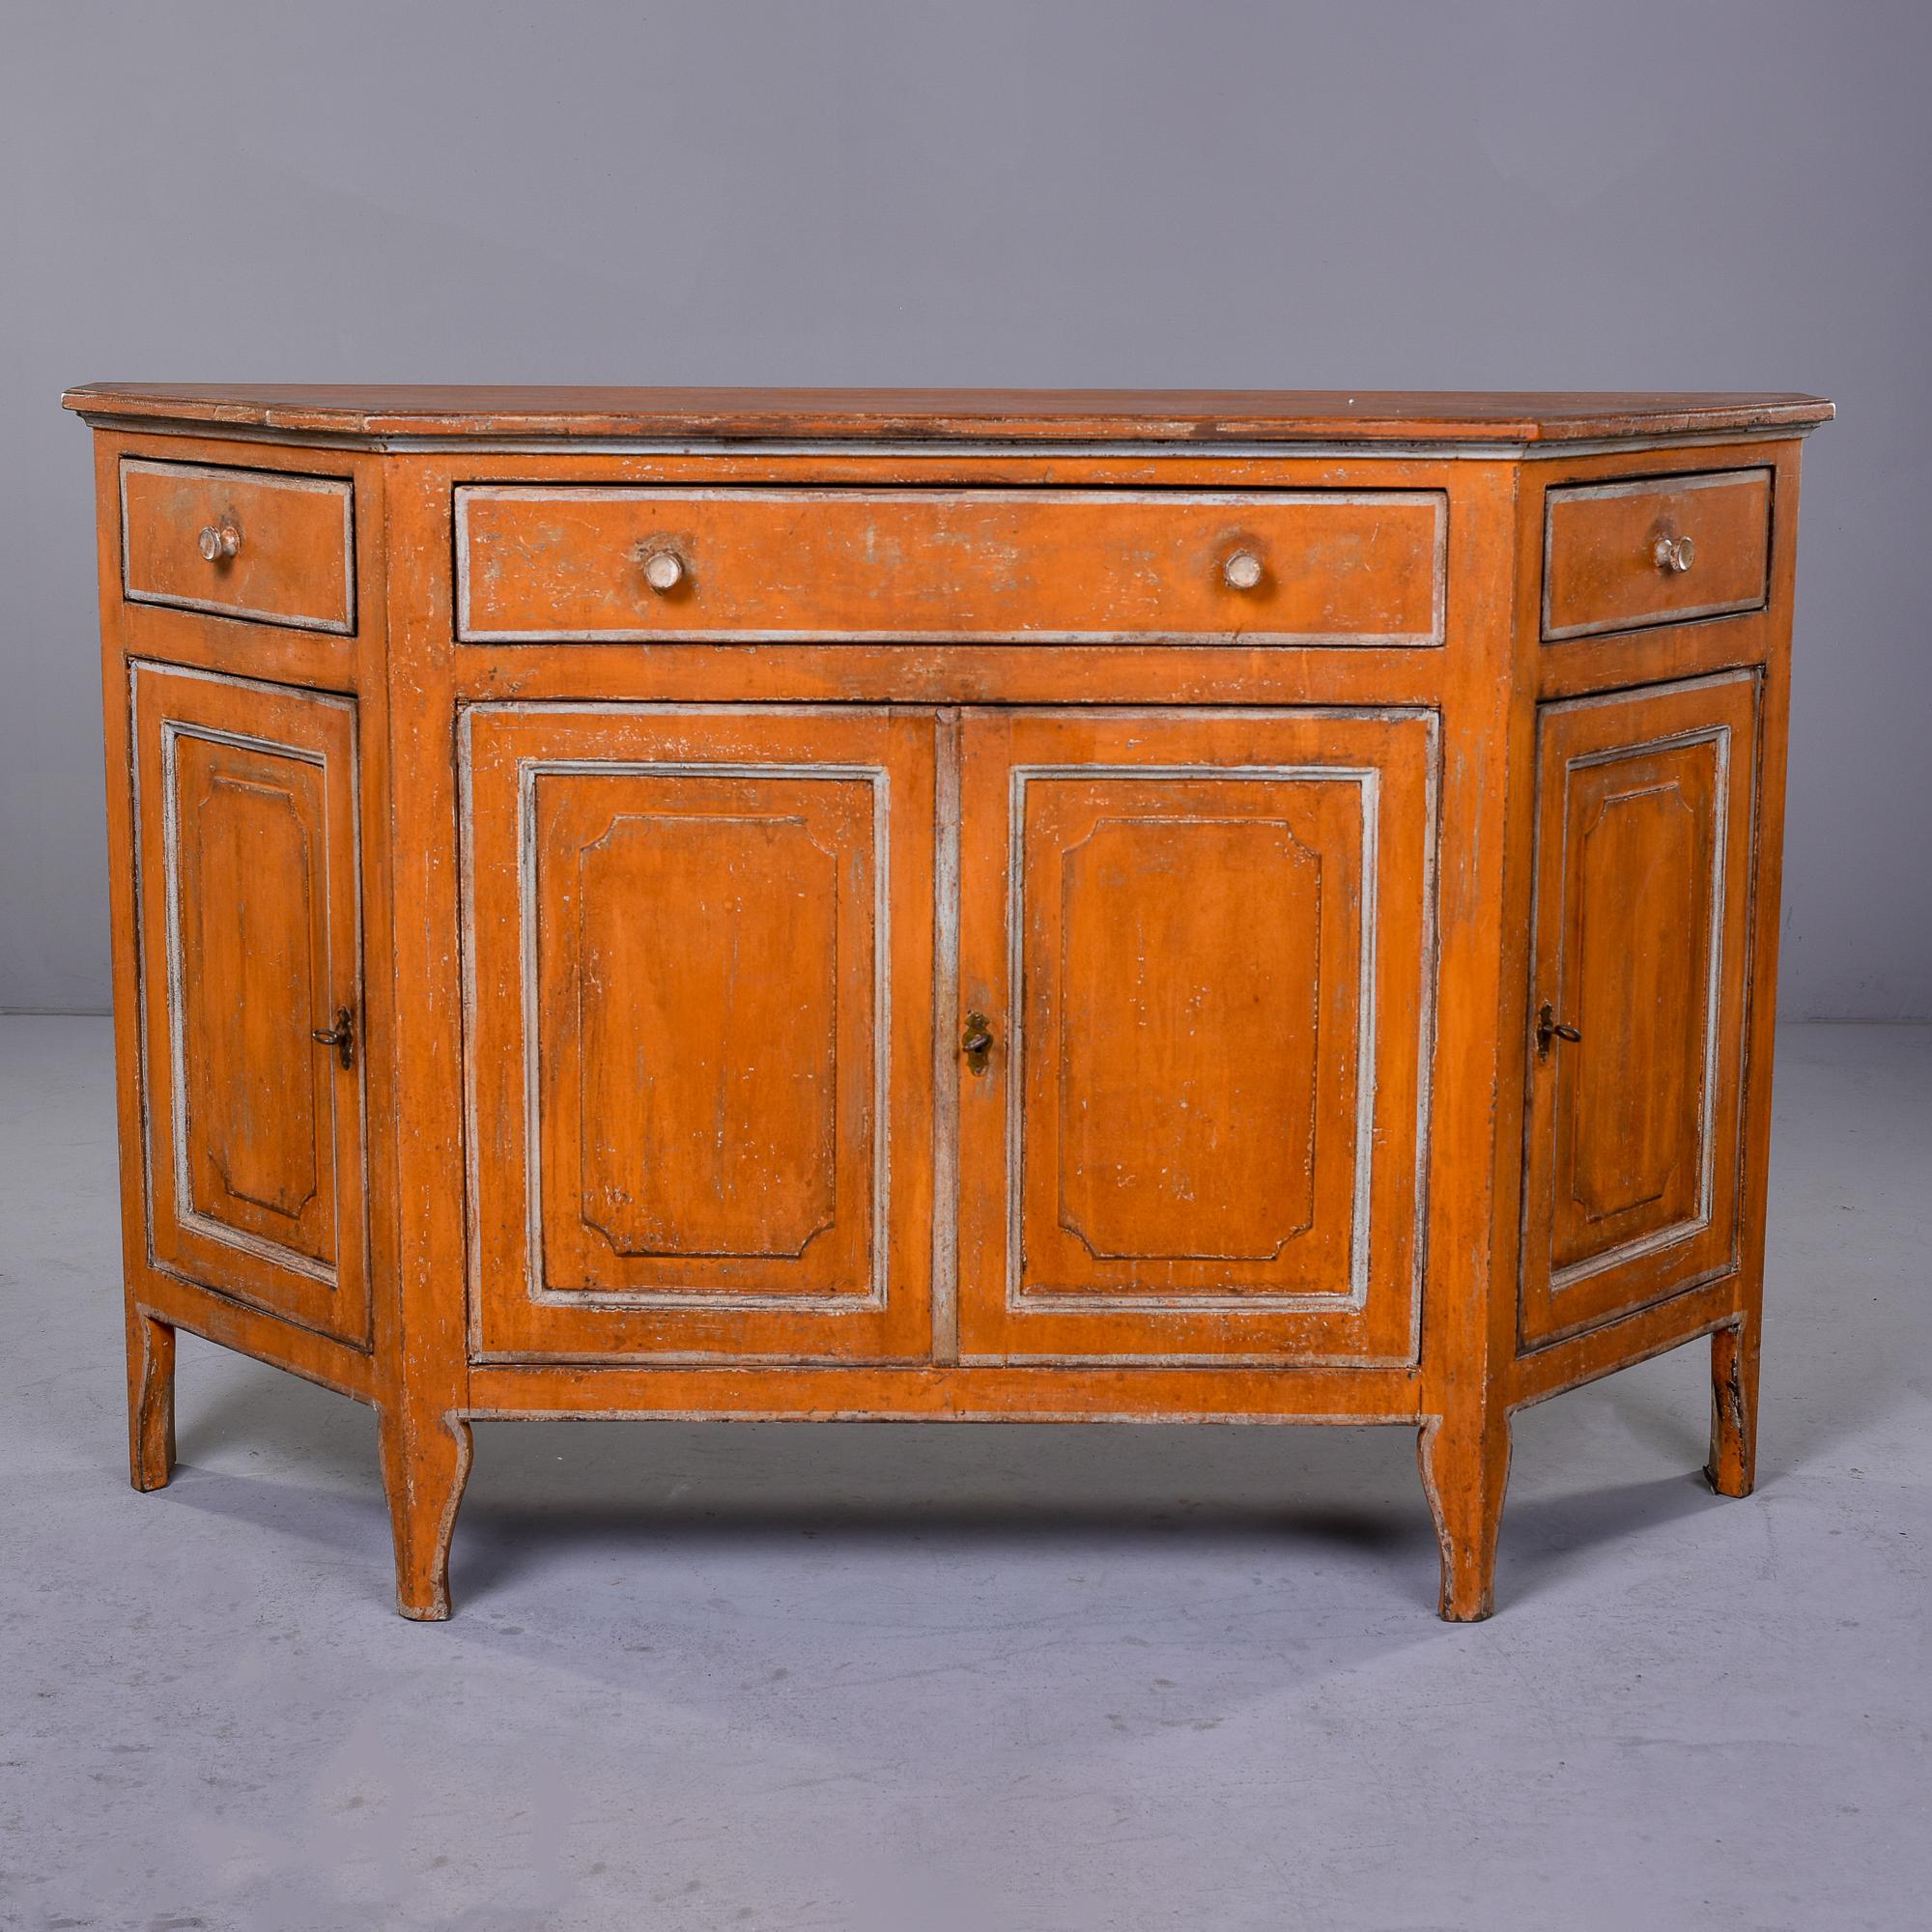 Circa 1890s painted buffet from the Bologna region of Italy. Cabinet is painted a muted pumpkin color with contrasting milky white trim. Center section has narrow drawer over a locking storage cabinet with two hinged doors and a fixed internal